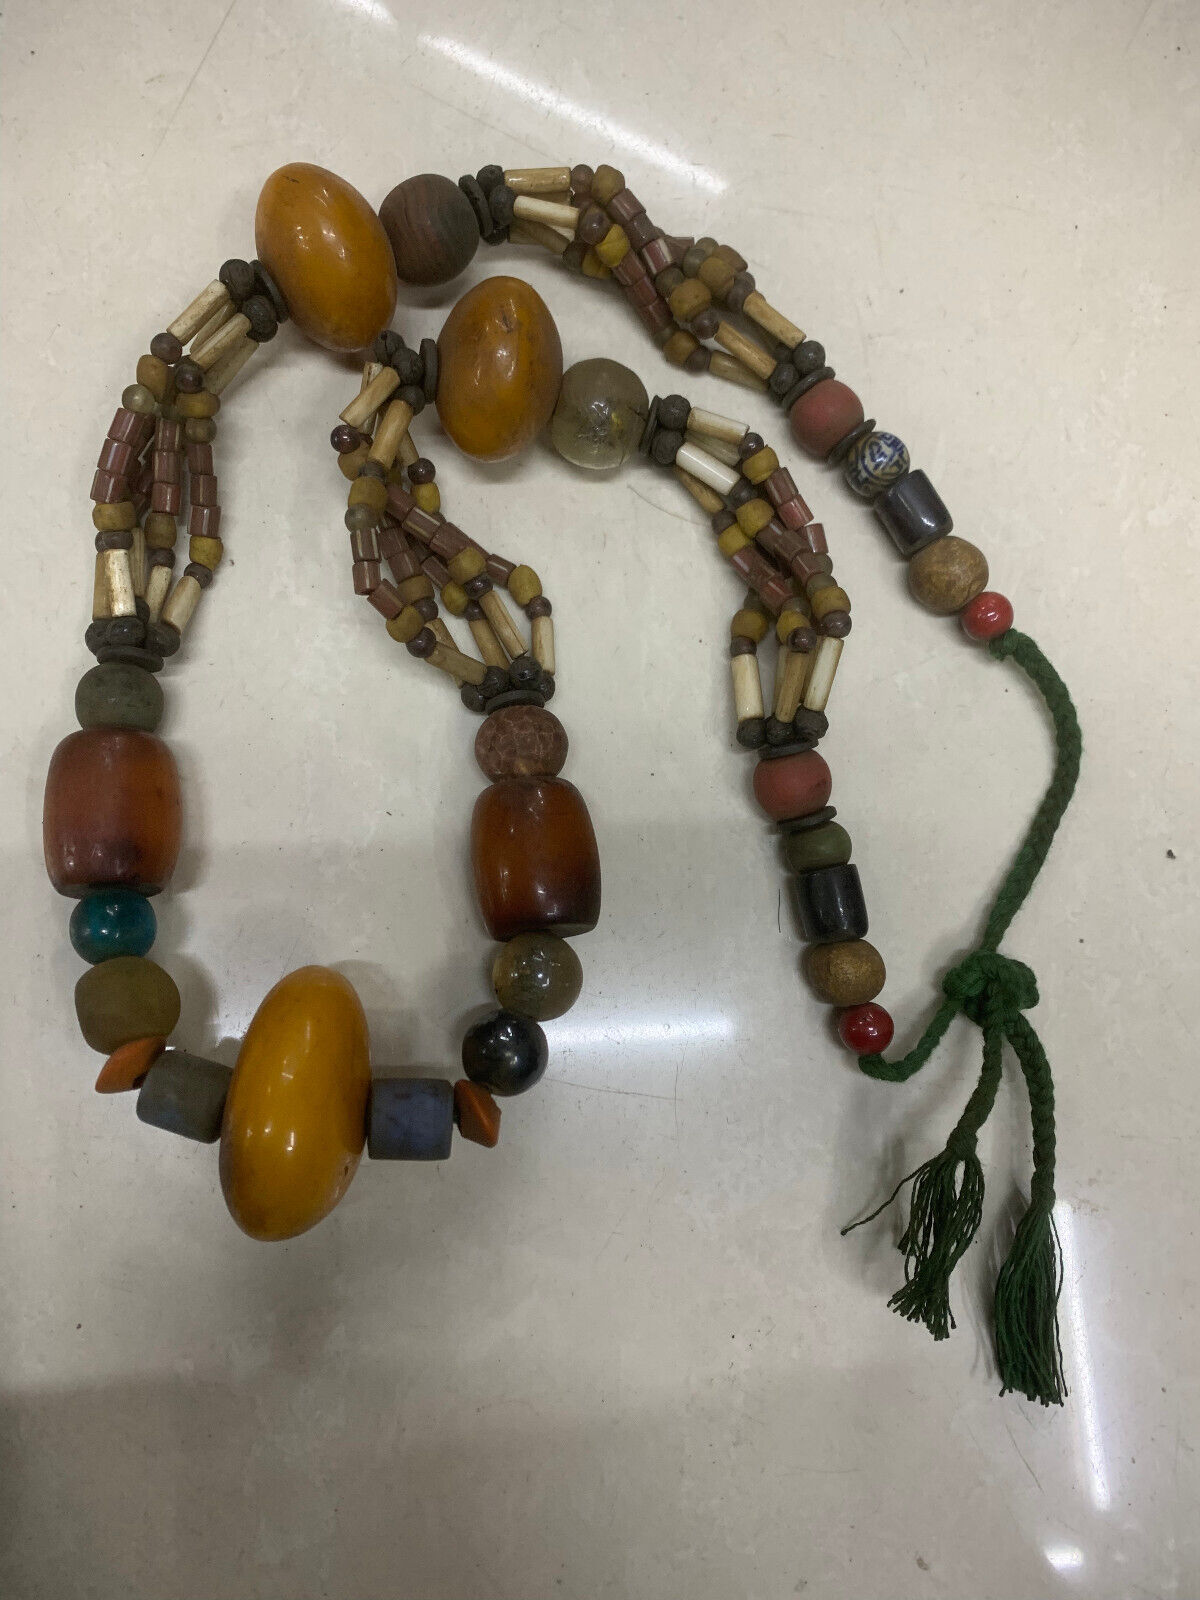 Large Tibetan Old Agate/Beeswax/Coloured Glaze Beads Prayer Necklace 